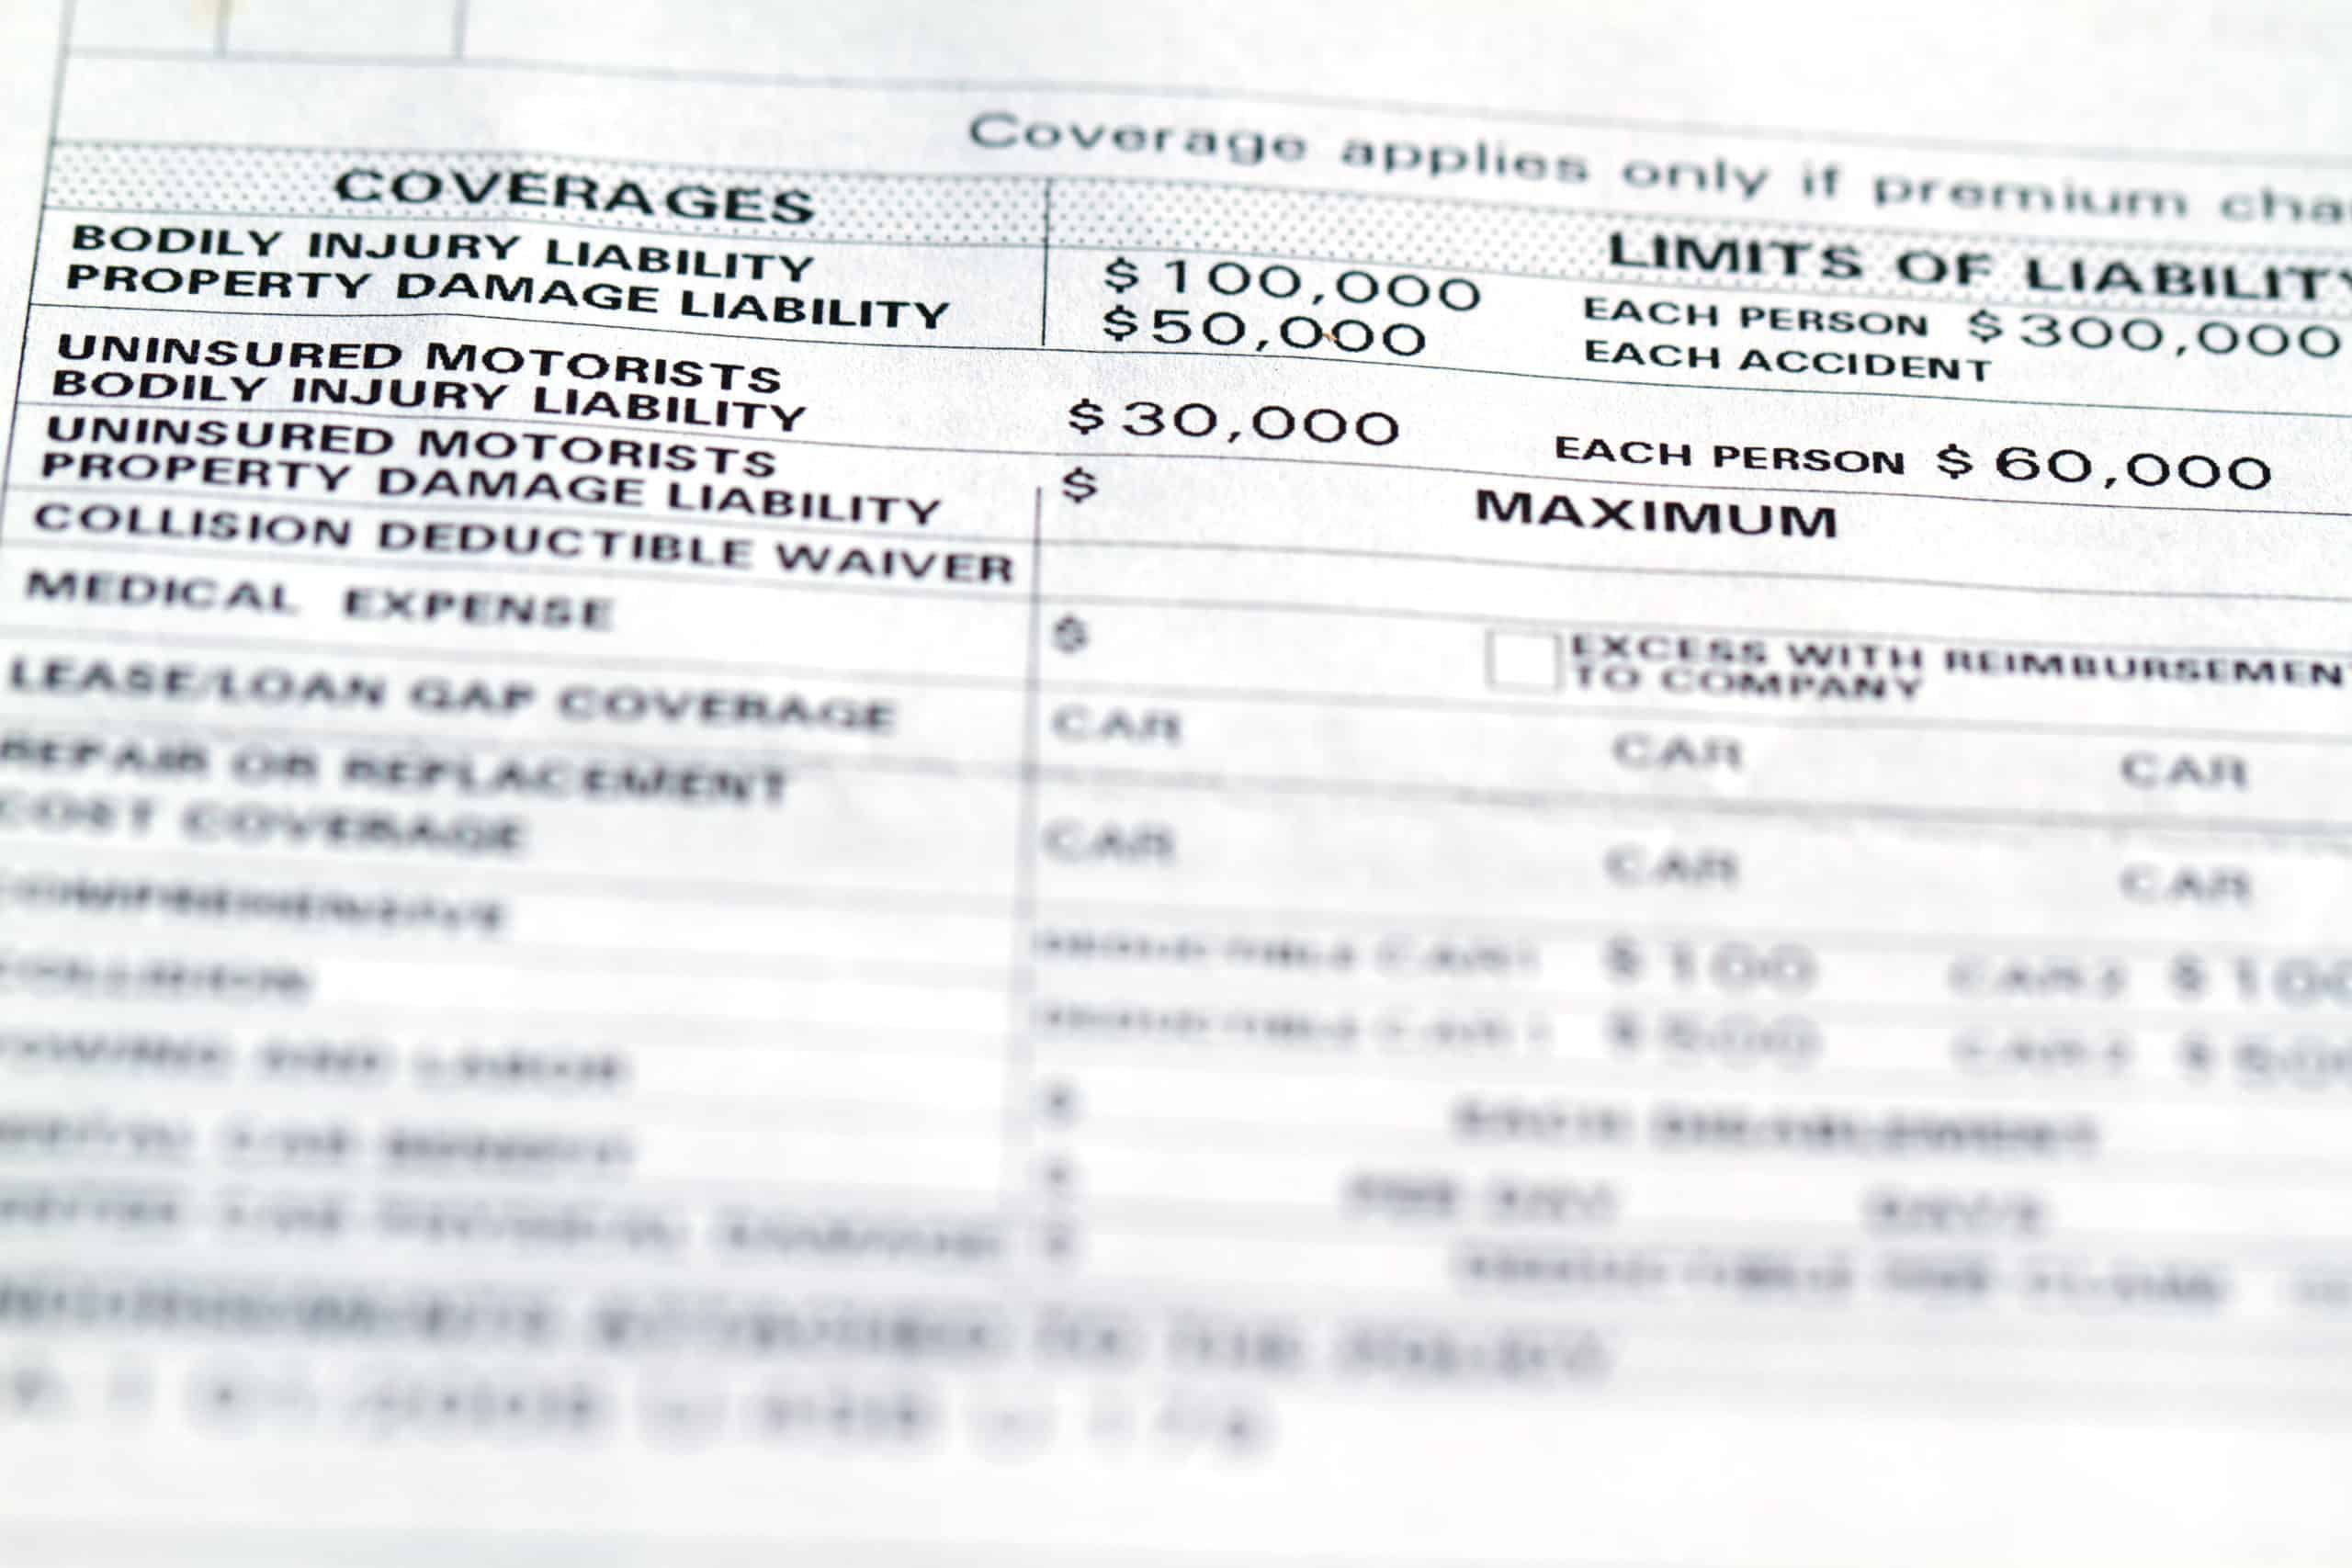 Car insurance premiums, limits, and deductibles from auto insurance agencies